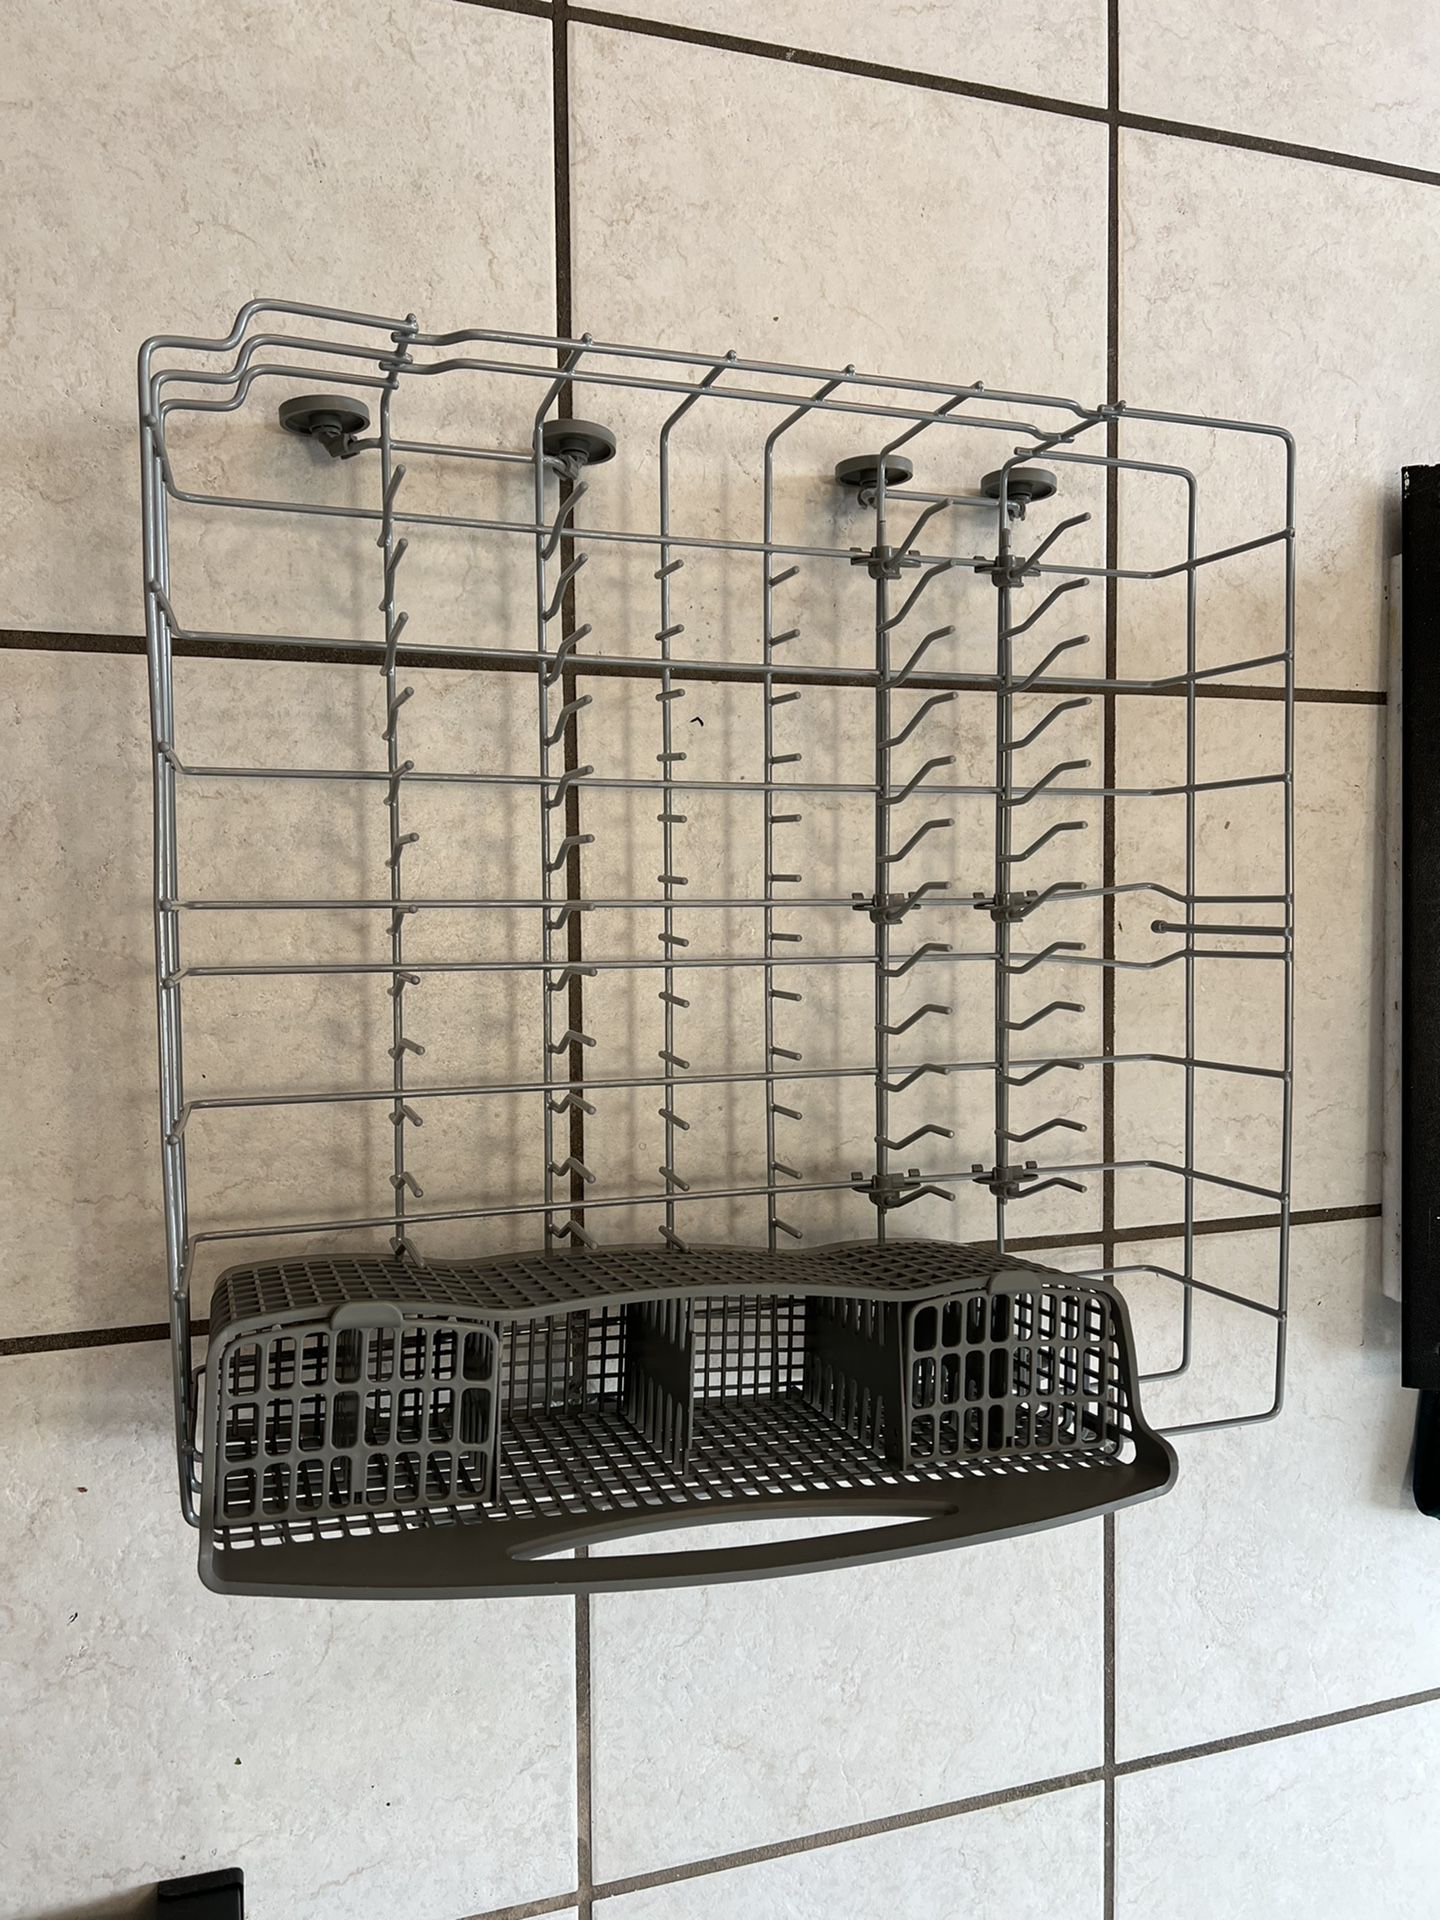 Mixer Slider Mat with 2 Pcs Cord Organizers for Sale in Ysleta Sur, TX -  OfferUp